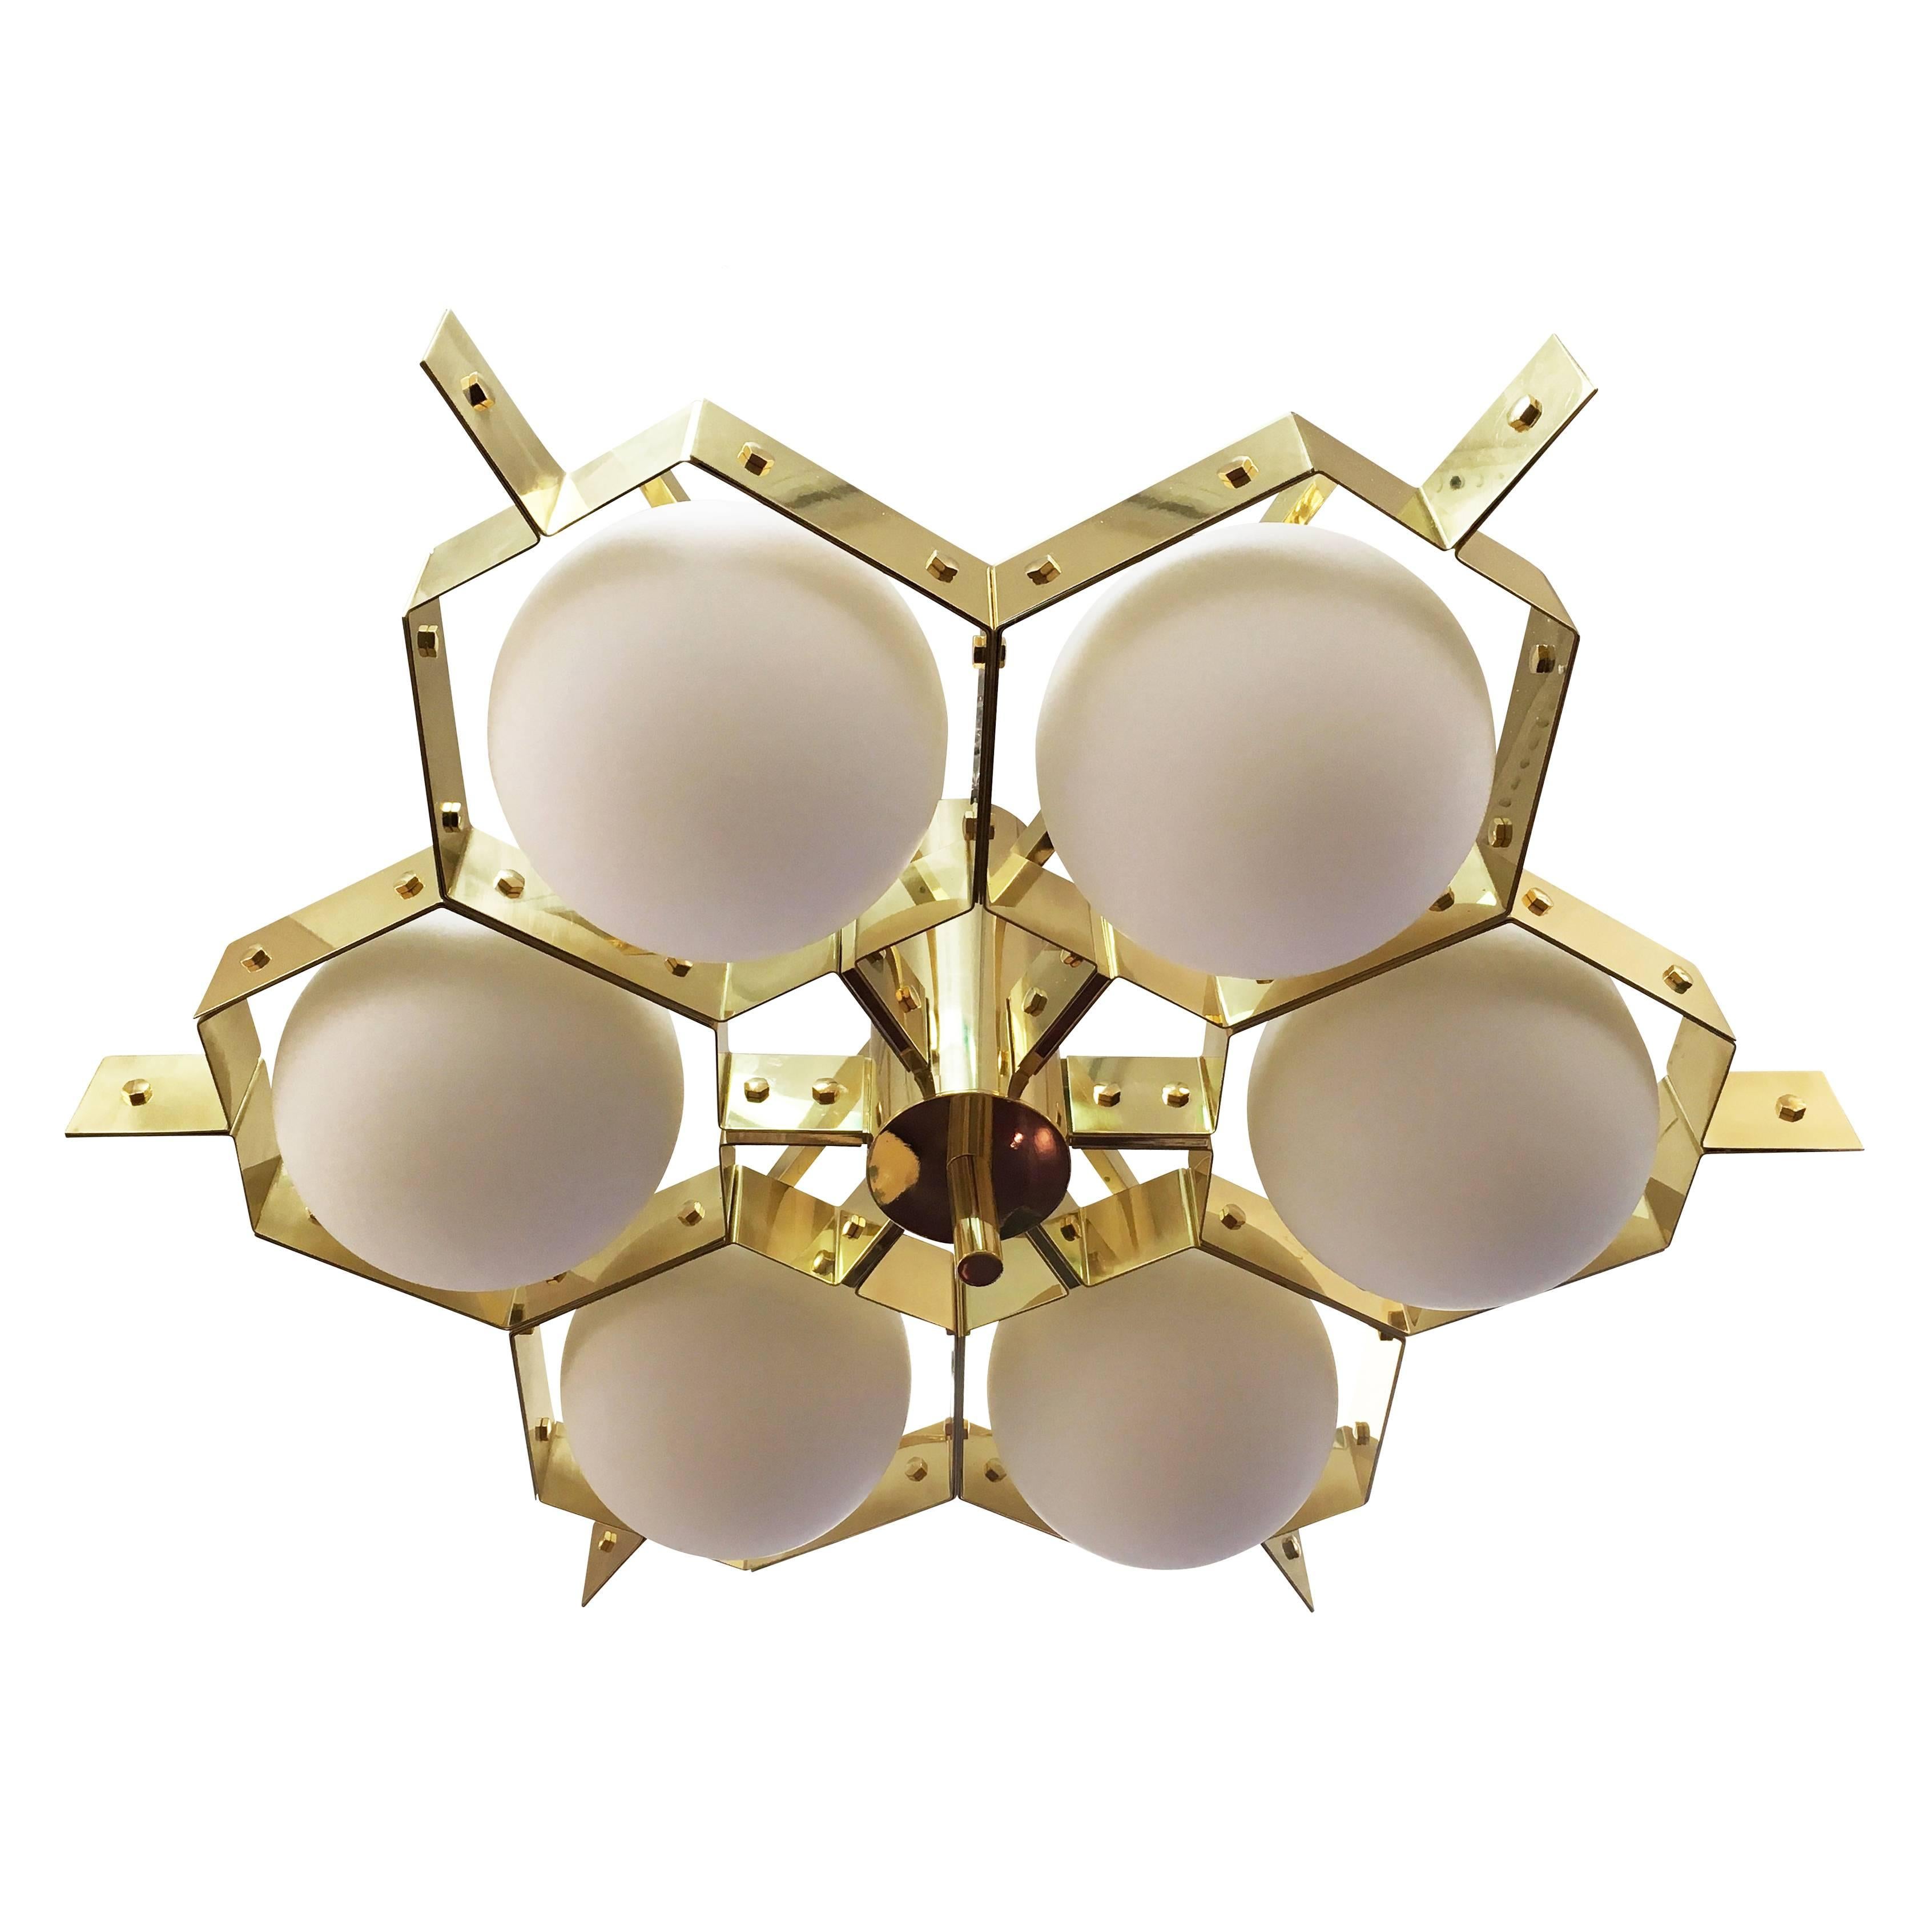 Brass lighting fixture with six frosted glass spheres encased in a bee hive-like structure. Designed in collaboration with Milanese Artist Fedele Papagni, it can be mounted as a flush mount or on a stem of any length. Can be customized in size and